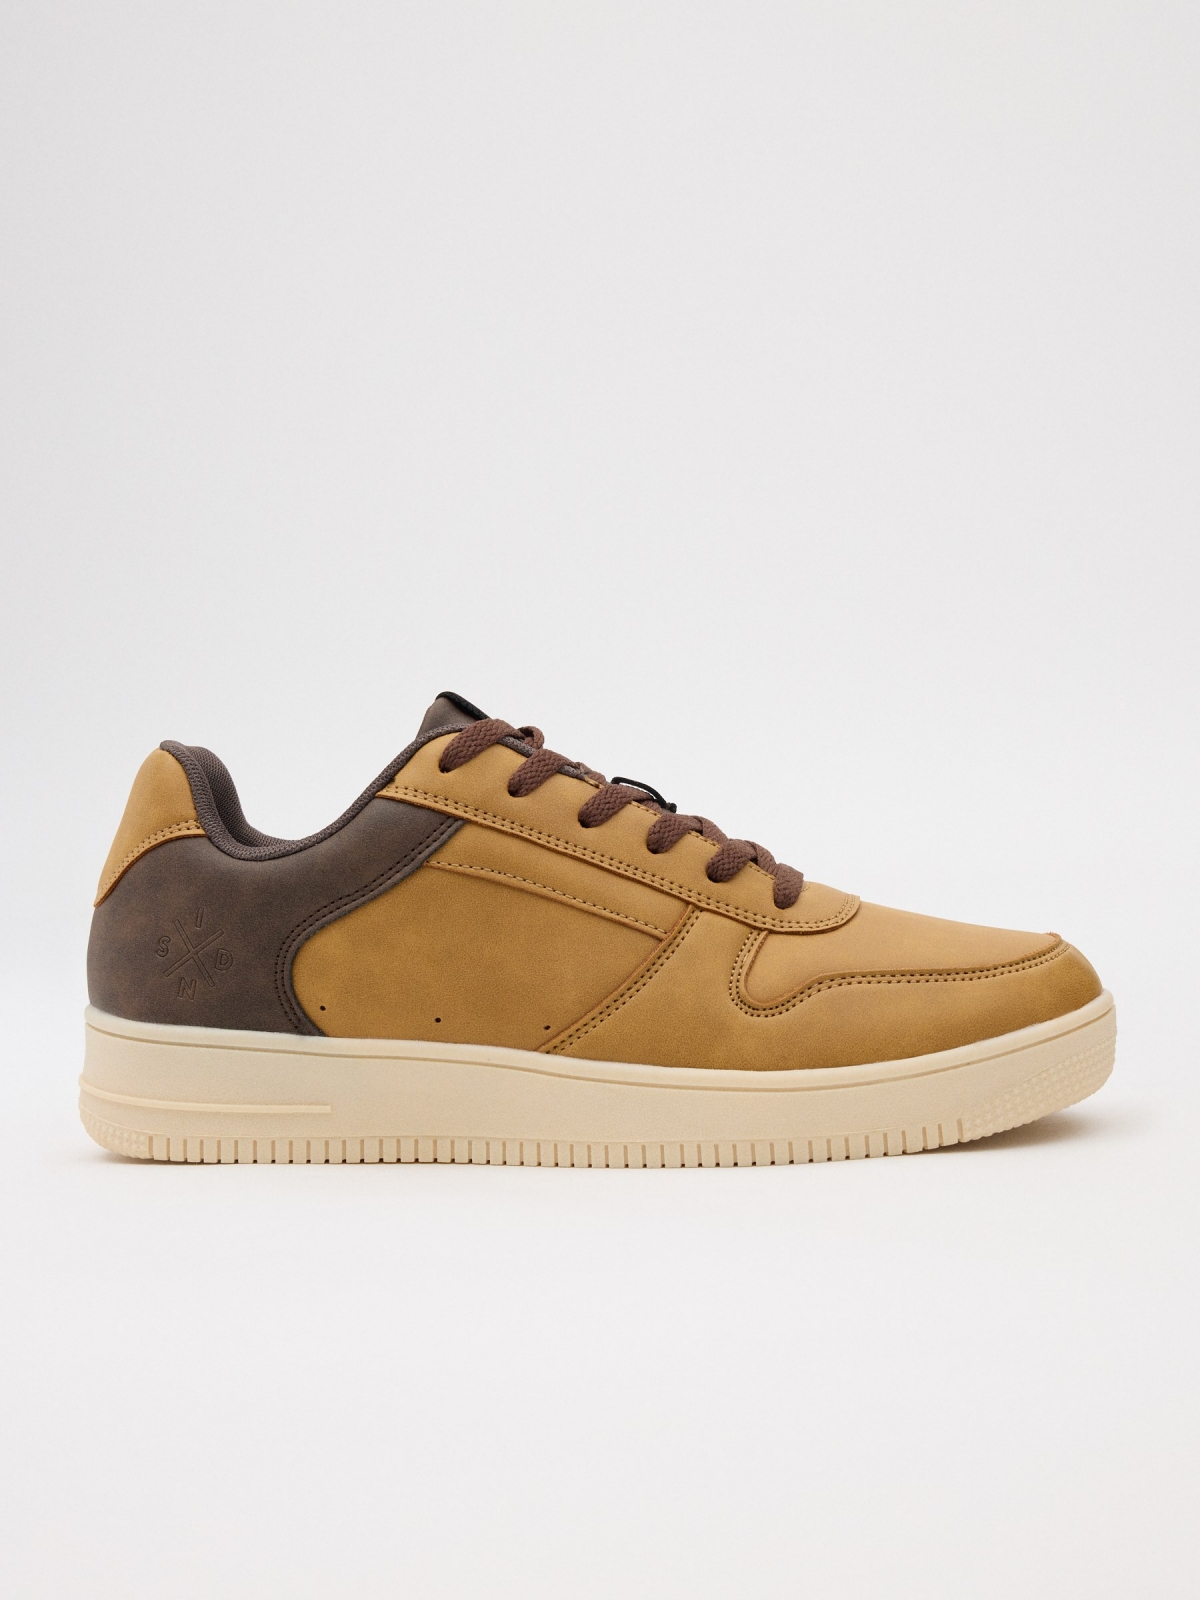 Basic casual combined sneaker brown